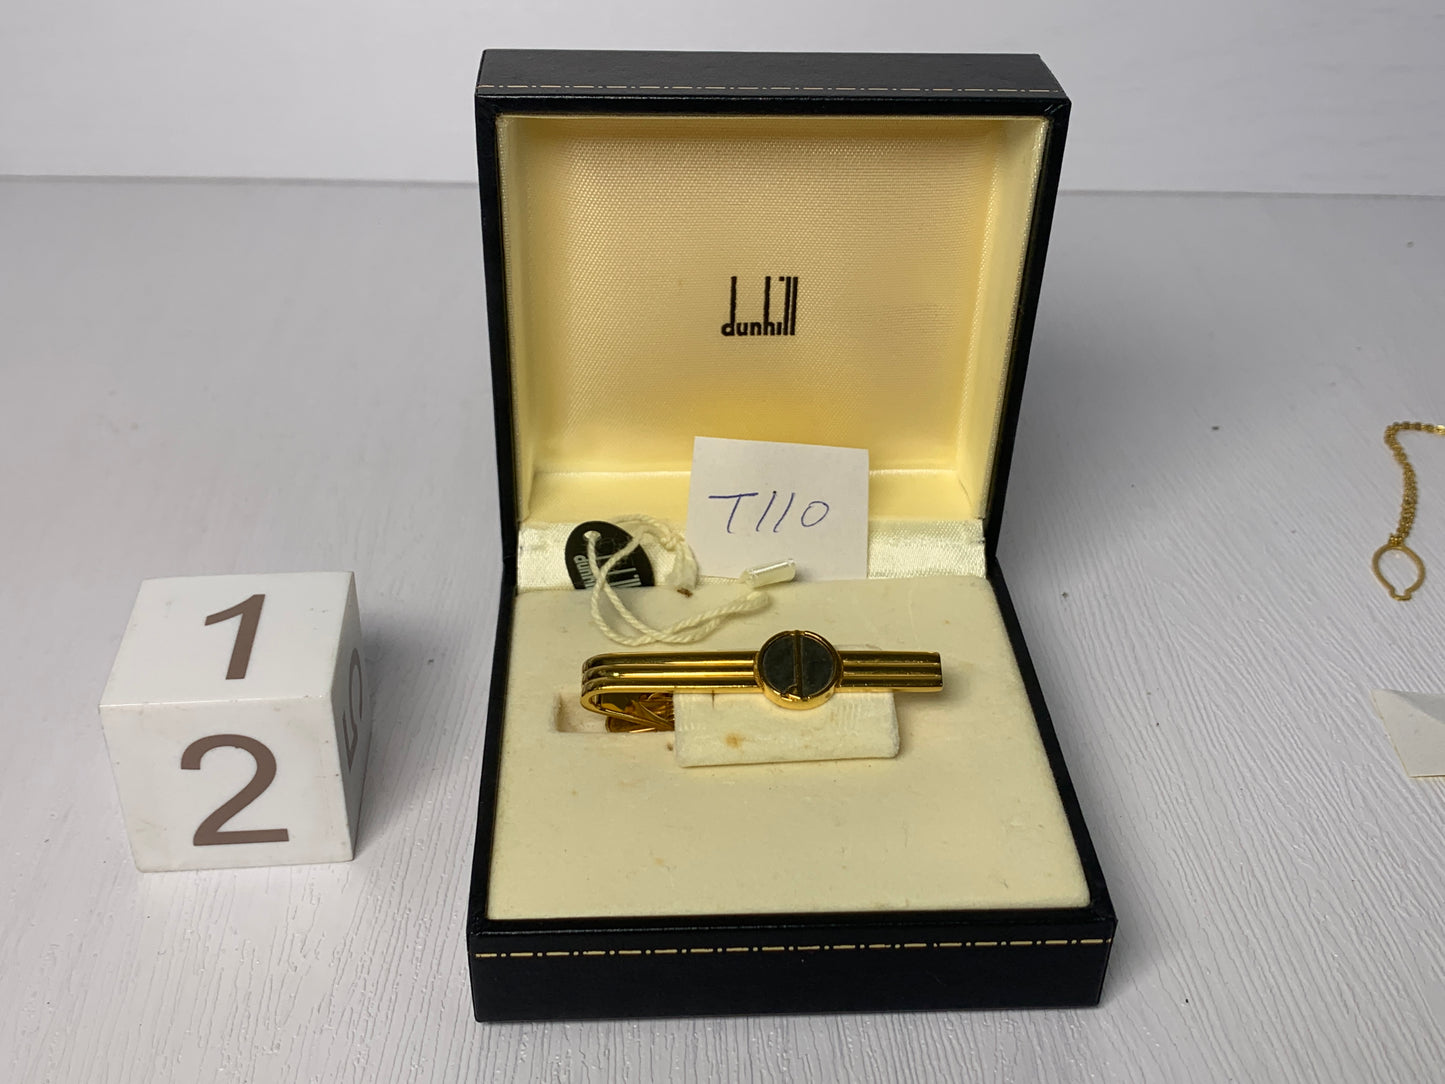 Vintage Gold tone Tie clip dunhill  christian Dior cufflinks with box  - 3MAR